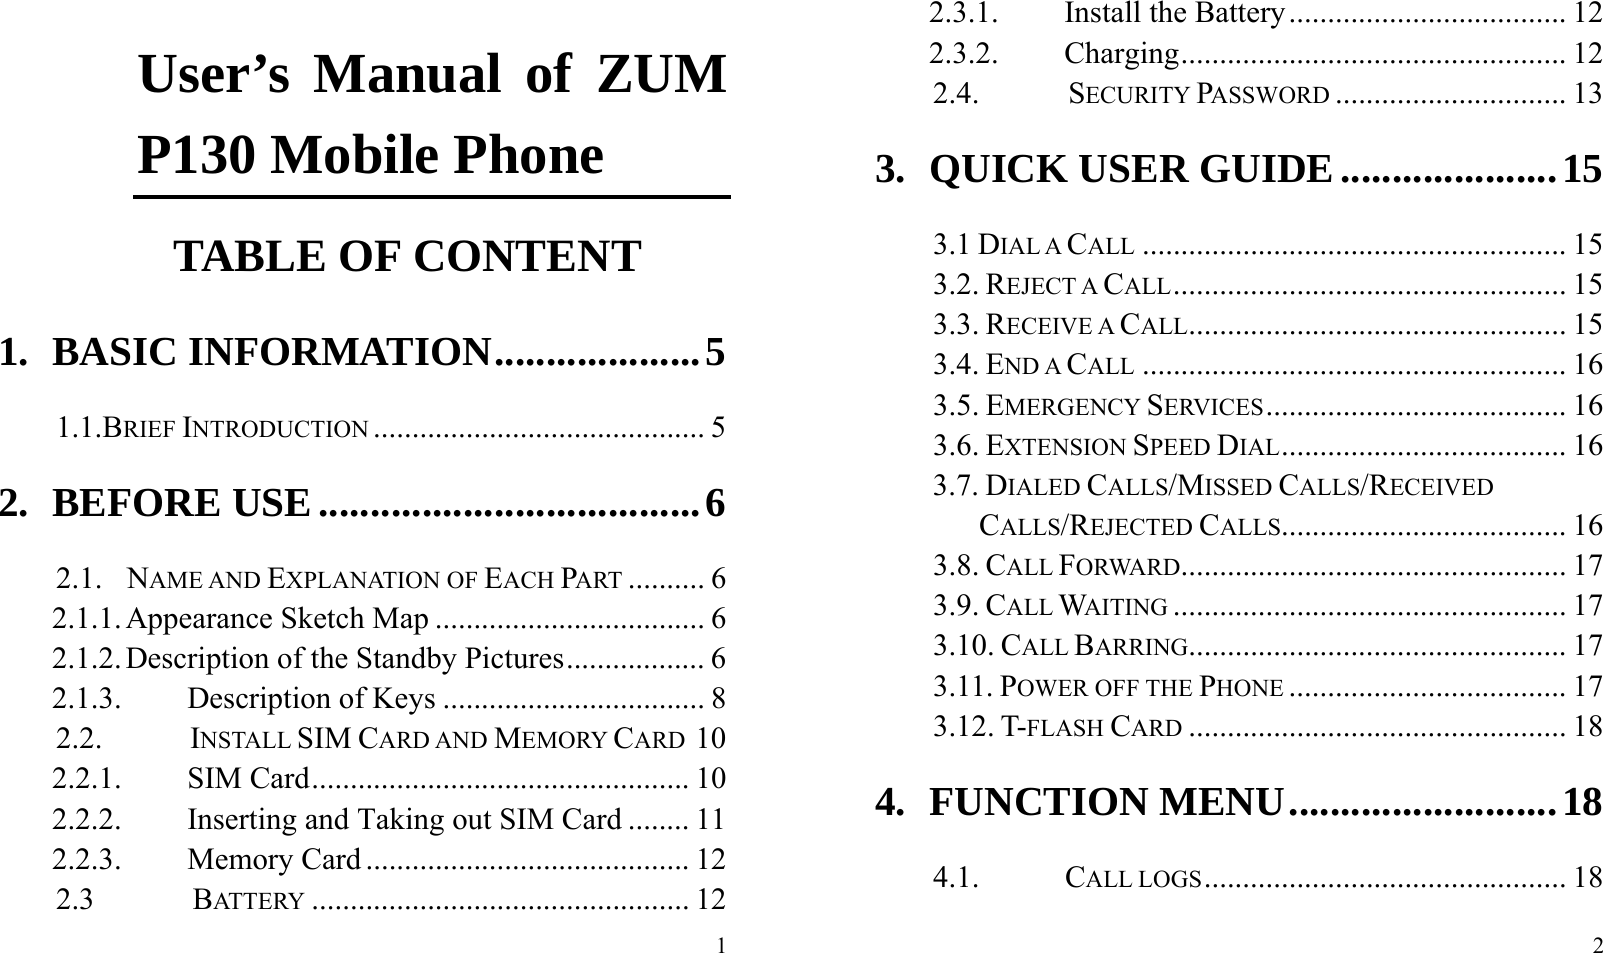  1 User’s Manual of ZUM P130 Mobile Phone                TABLE OF CONTENT 1. BASIC INFORMATION .................... 5 1.1.BRIEF INTRODUCTION ........................................... 5 2. BEFORE USE ..................................... 6 2.1.  NAME AND EXPLANATION OF EACH PART .......... 6 2.1.1. Appearance Sketch Map ................................... 6 2.1.2. Description of the Standby Pictures .................. 6 2.1.3. Description of Keys .................................. 8 2.2.        INSTALL SIM CARD AND MEMORY CARD 10 2.2.1. SIM Card ................................................. 10 2.2.2. Inserting and Taking out SIM Card ........ 11 2.2.3. Memory Card .......................................... 12 2.3        BATTERY ................................................. 12  2 2.3.1. Install the Battery .................................... 12 2.3.2. Charging .................................................. 12 2.4.        SECURITY PASSWORD .............................. 13 3. QUICK USER GUIDE ..................... 15 3.1 DIAL A CALL ....................................................... 15 3.2. REJECT A CALL ................................................... 15 3.3. RECEIVE A CALL ................................................. 15 3.4. END A CALL ....................................................... 16 3.5. EMERGENCY SERVICES ....................................... 16 3.6. EXTENSION SPEED DIAL ..................................... 16 3.7. DIALED CALLS/MISSED CALLS/RECEIVED CALLS/REJECTED CALLS..................................... 16 3.8. CALL FORWARD .................................................. 17 3.9. CALL WAITING ................................................... 17 3.10. CALL BARRING................................................. 17 3.11. POWER OFF THE PHONE .................................... 17 3.12. T-FLASH CARD ................................................. 18 4. FUNCTION MENU .......................... 18 4.1.       CALL LOGS ............................................... 18 